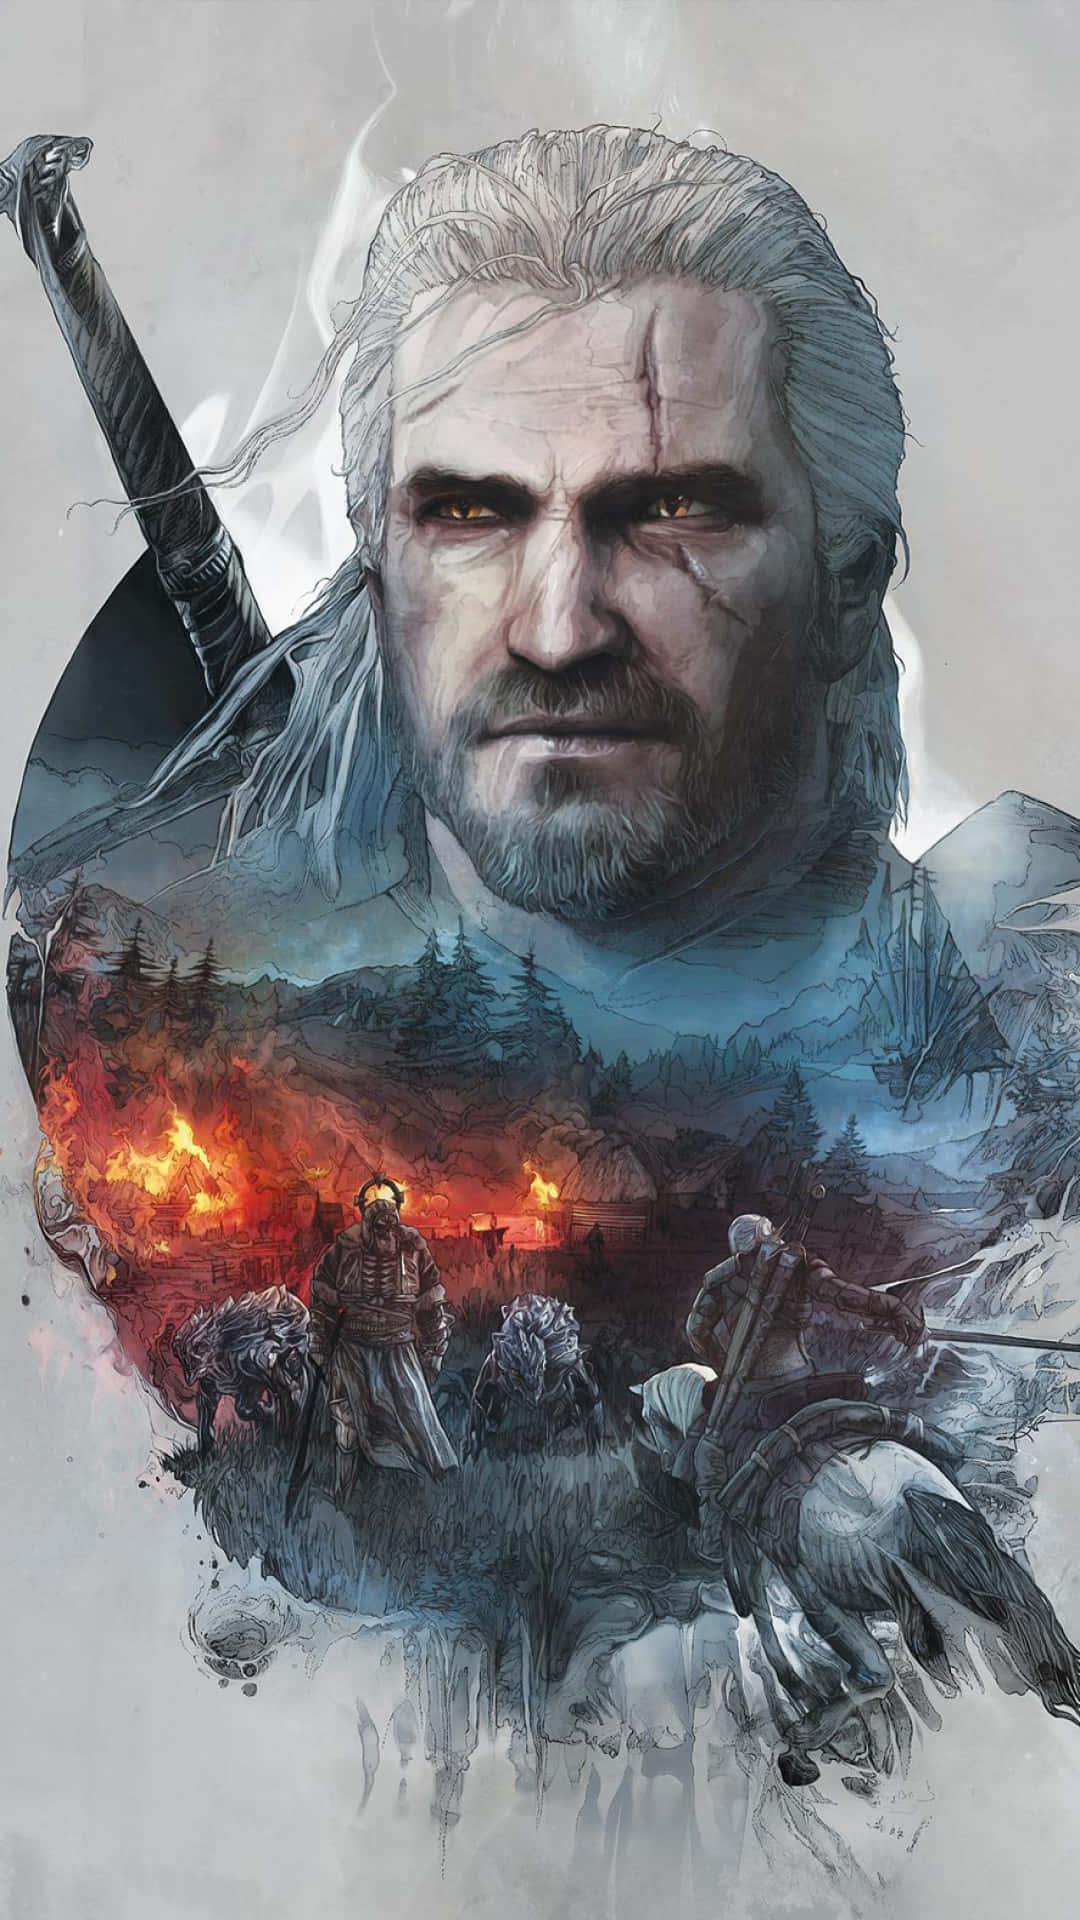 Geralt of Rivia in The Witcher's Magical World